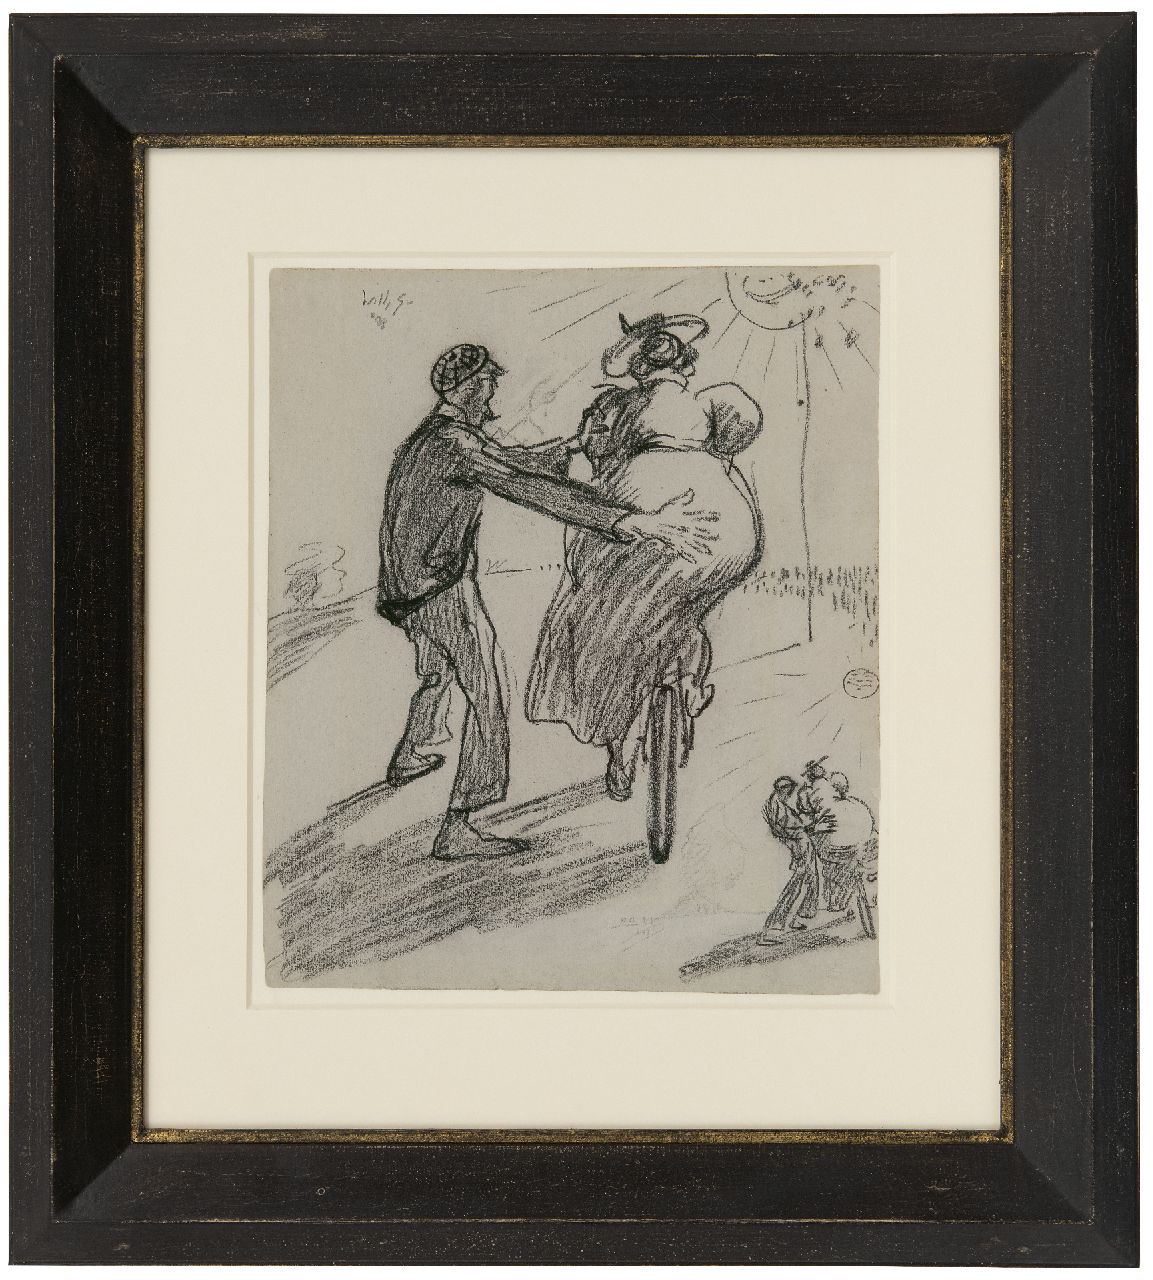 Sluiter J.W.  | Jan Willem 'Willy' Sluiter, A helping hand, charcoal on paper 22.5 x 15.0 cm, signed u.l. and dated '08